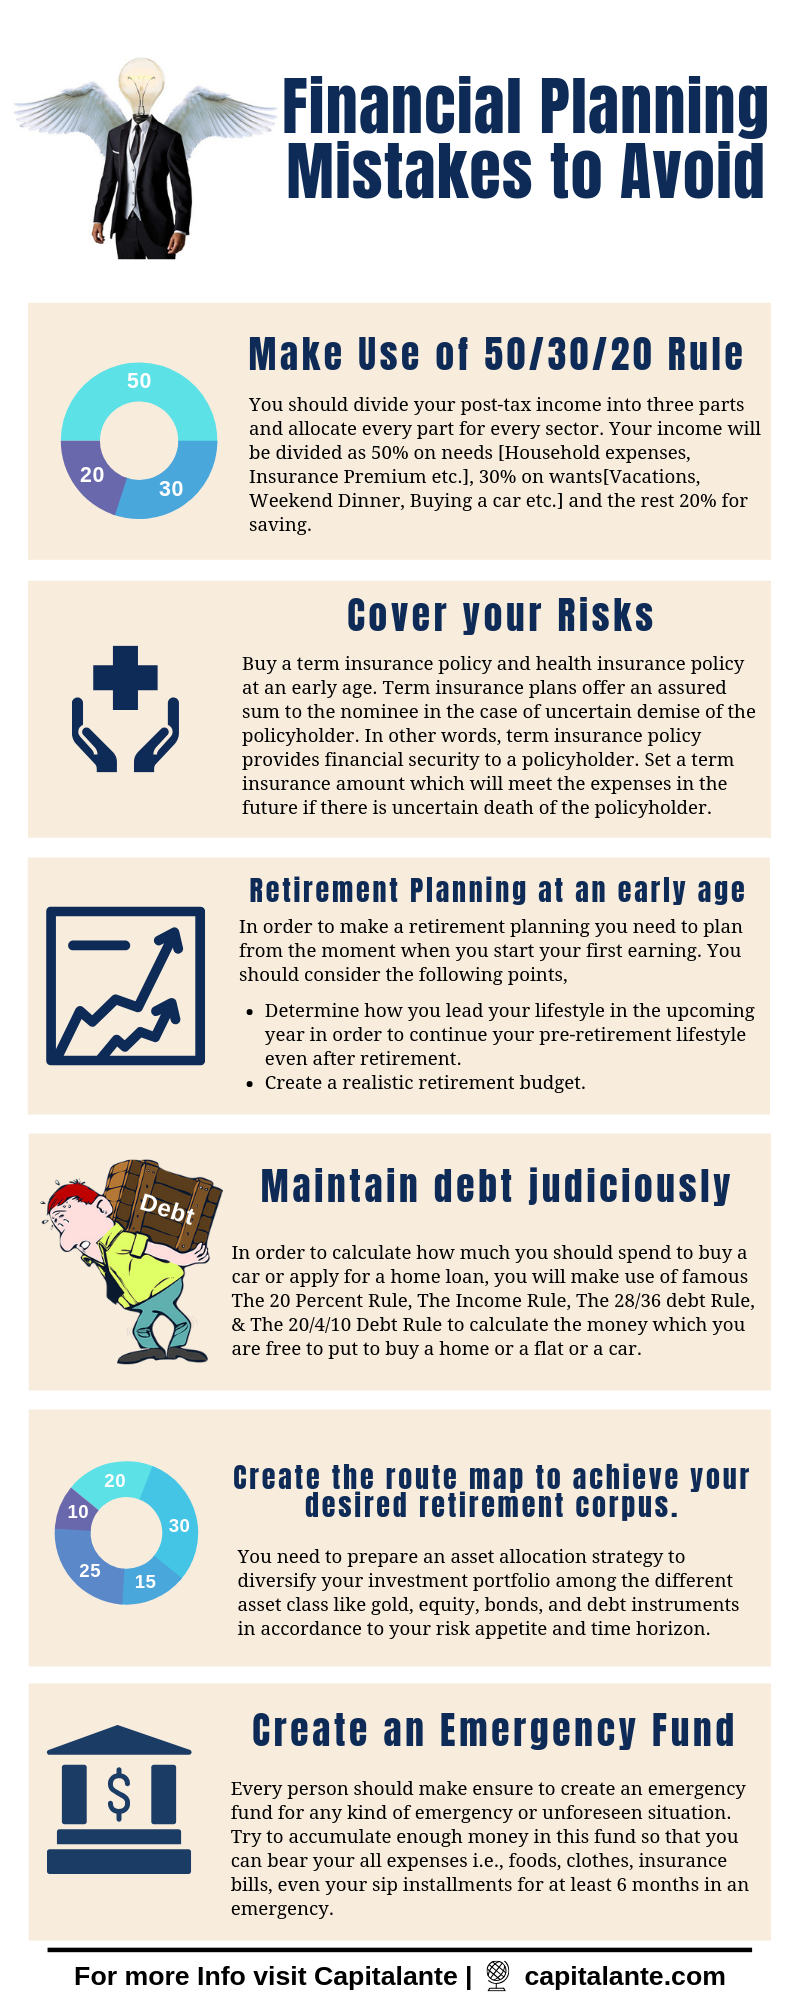 Financial planning mistakes to avoid